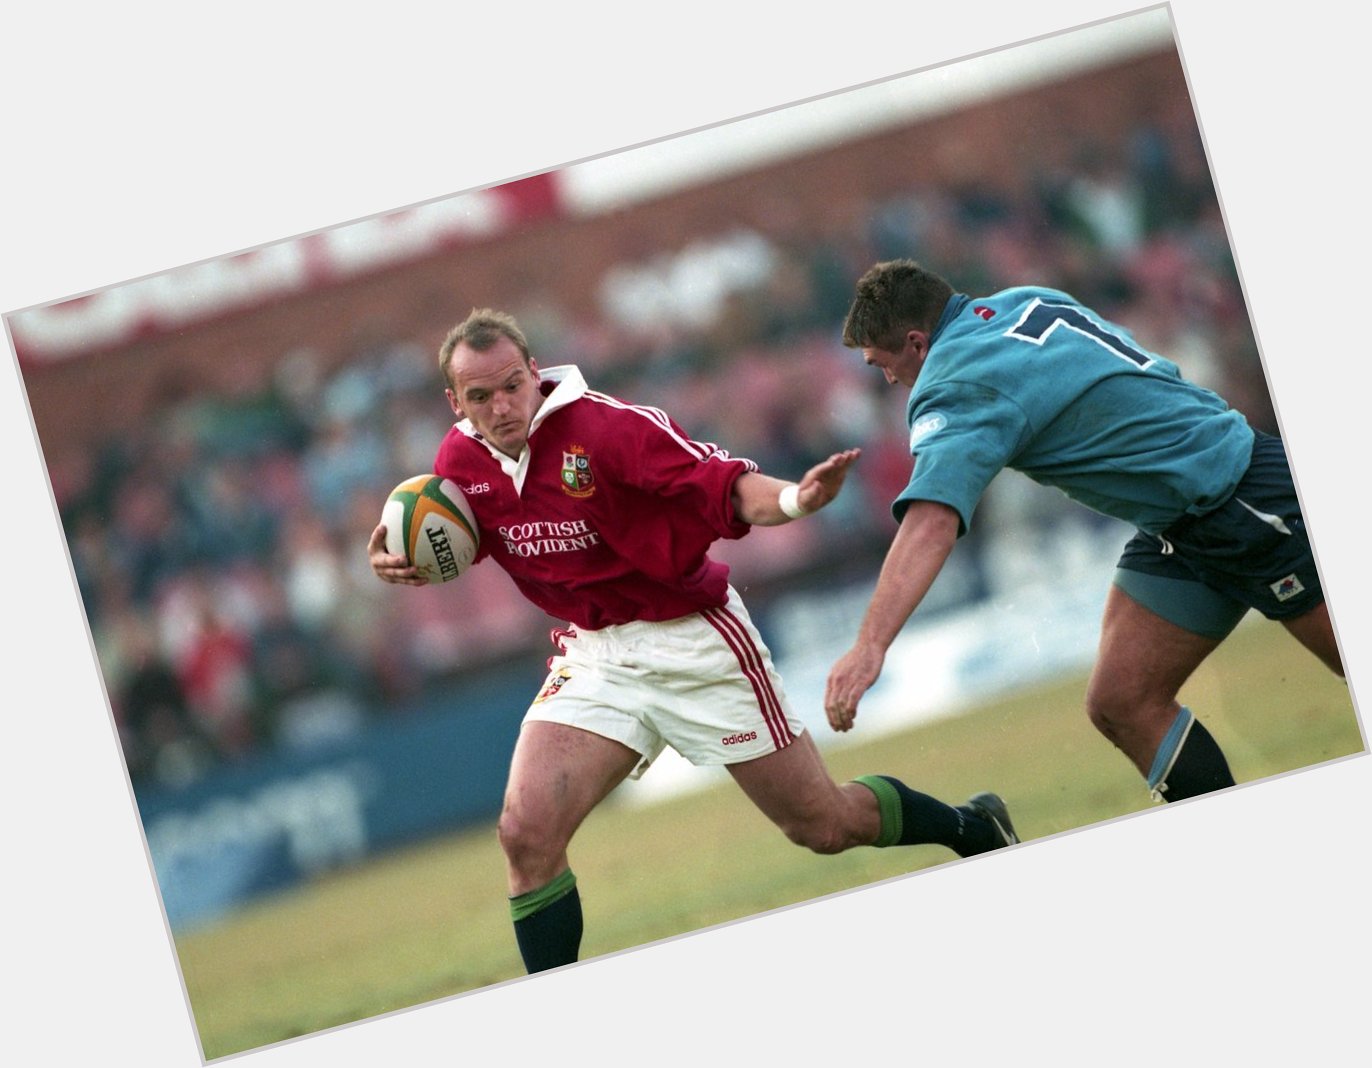 Wishing 1997 Lion Gregor Townsend a very Happy Birthday!   